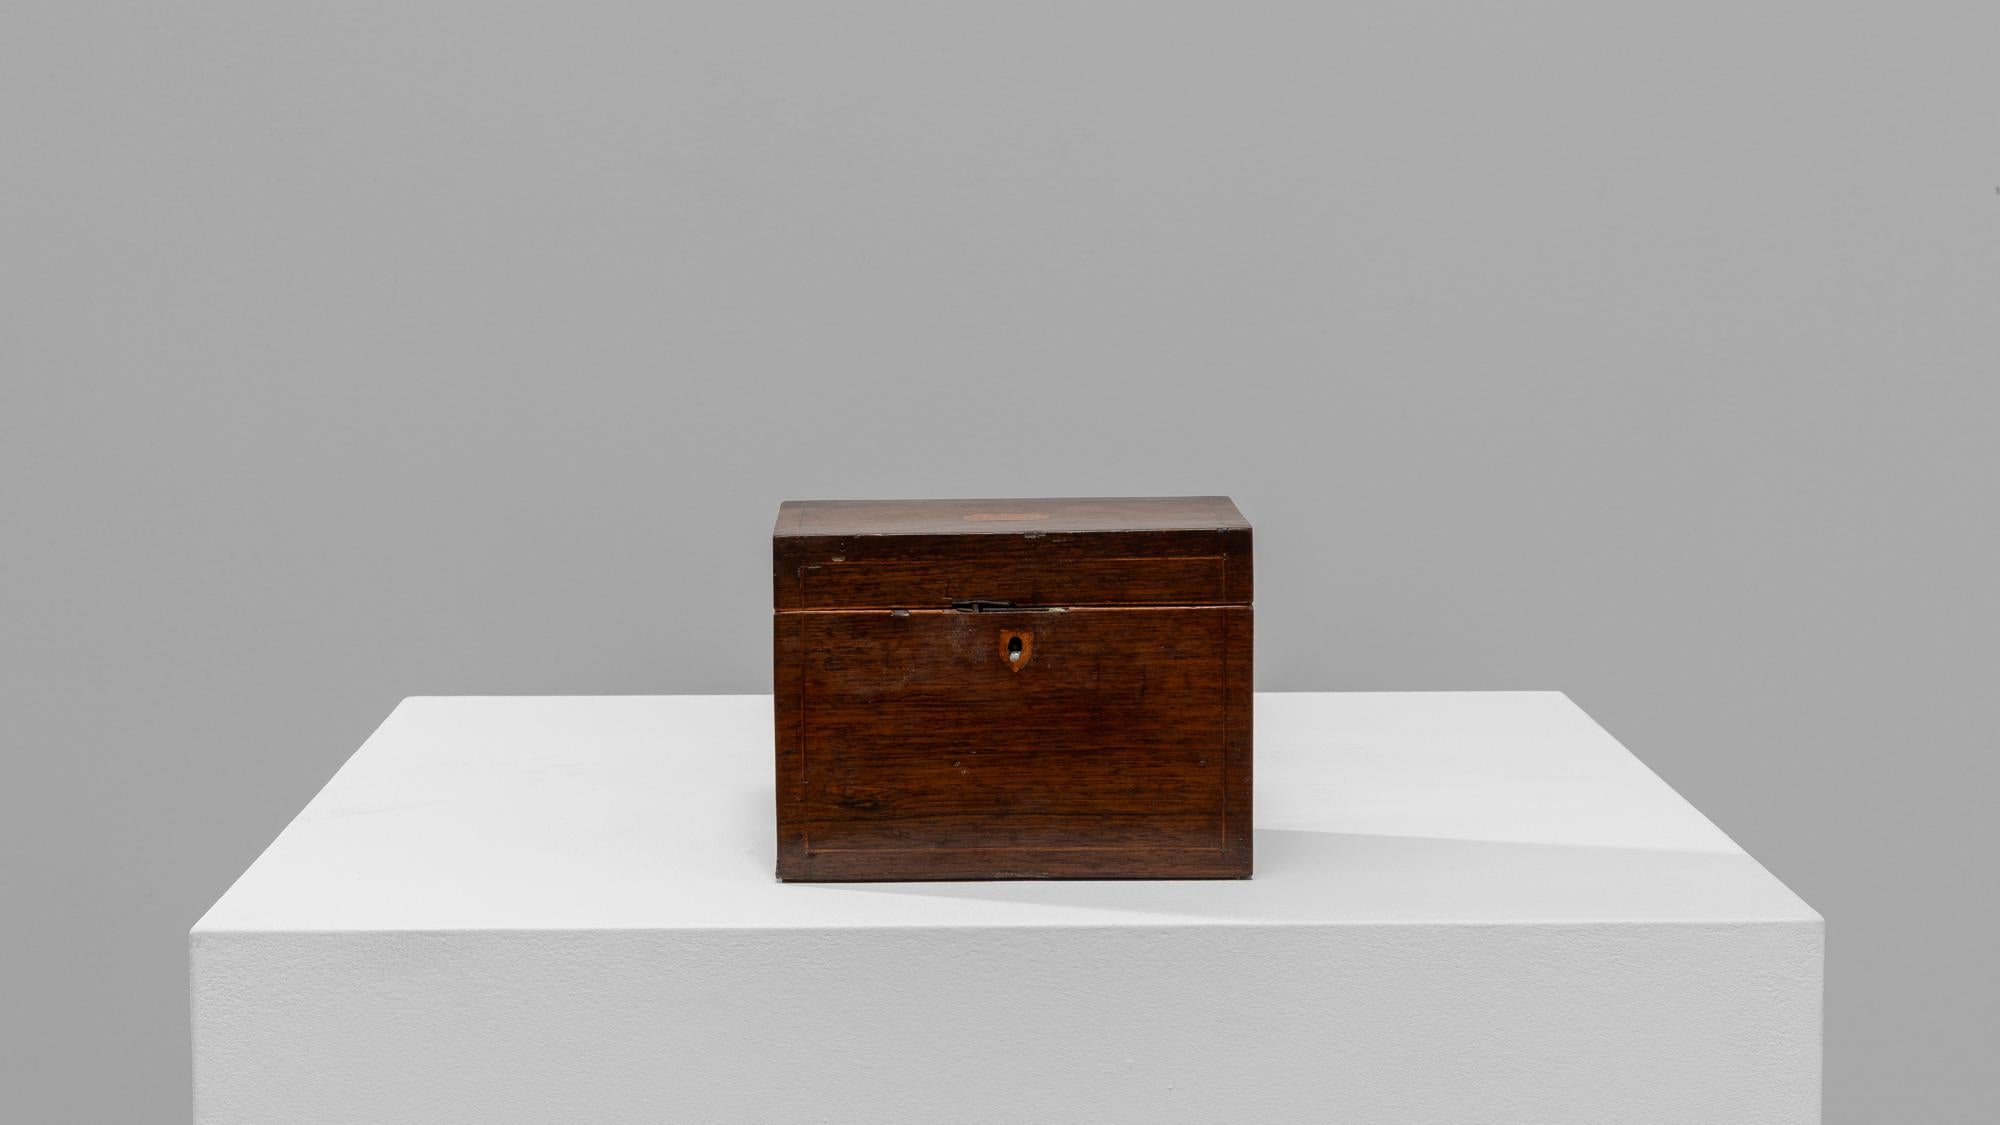 Step back in time with this charming 19th-century French wooden box, an exquisite piece that marries functionality with rustic elegance. Crafted from rich, dark wood, this box exudes a warm, inviting patina that speaks to its storied past. The